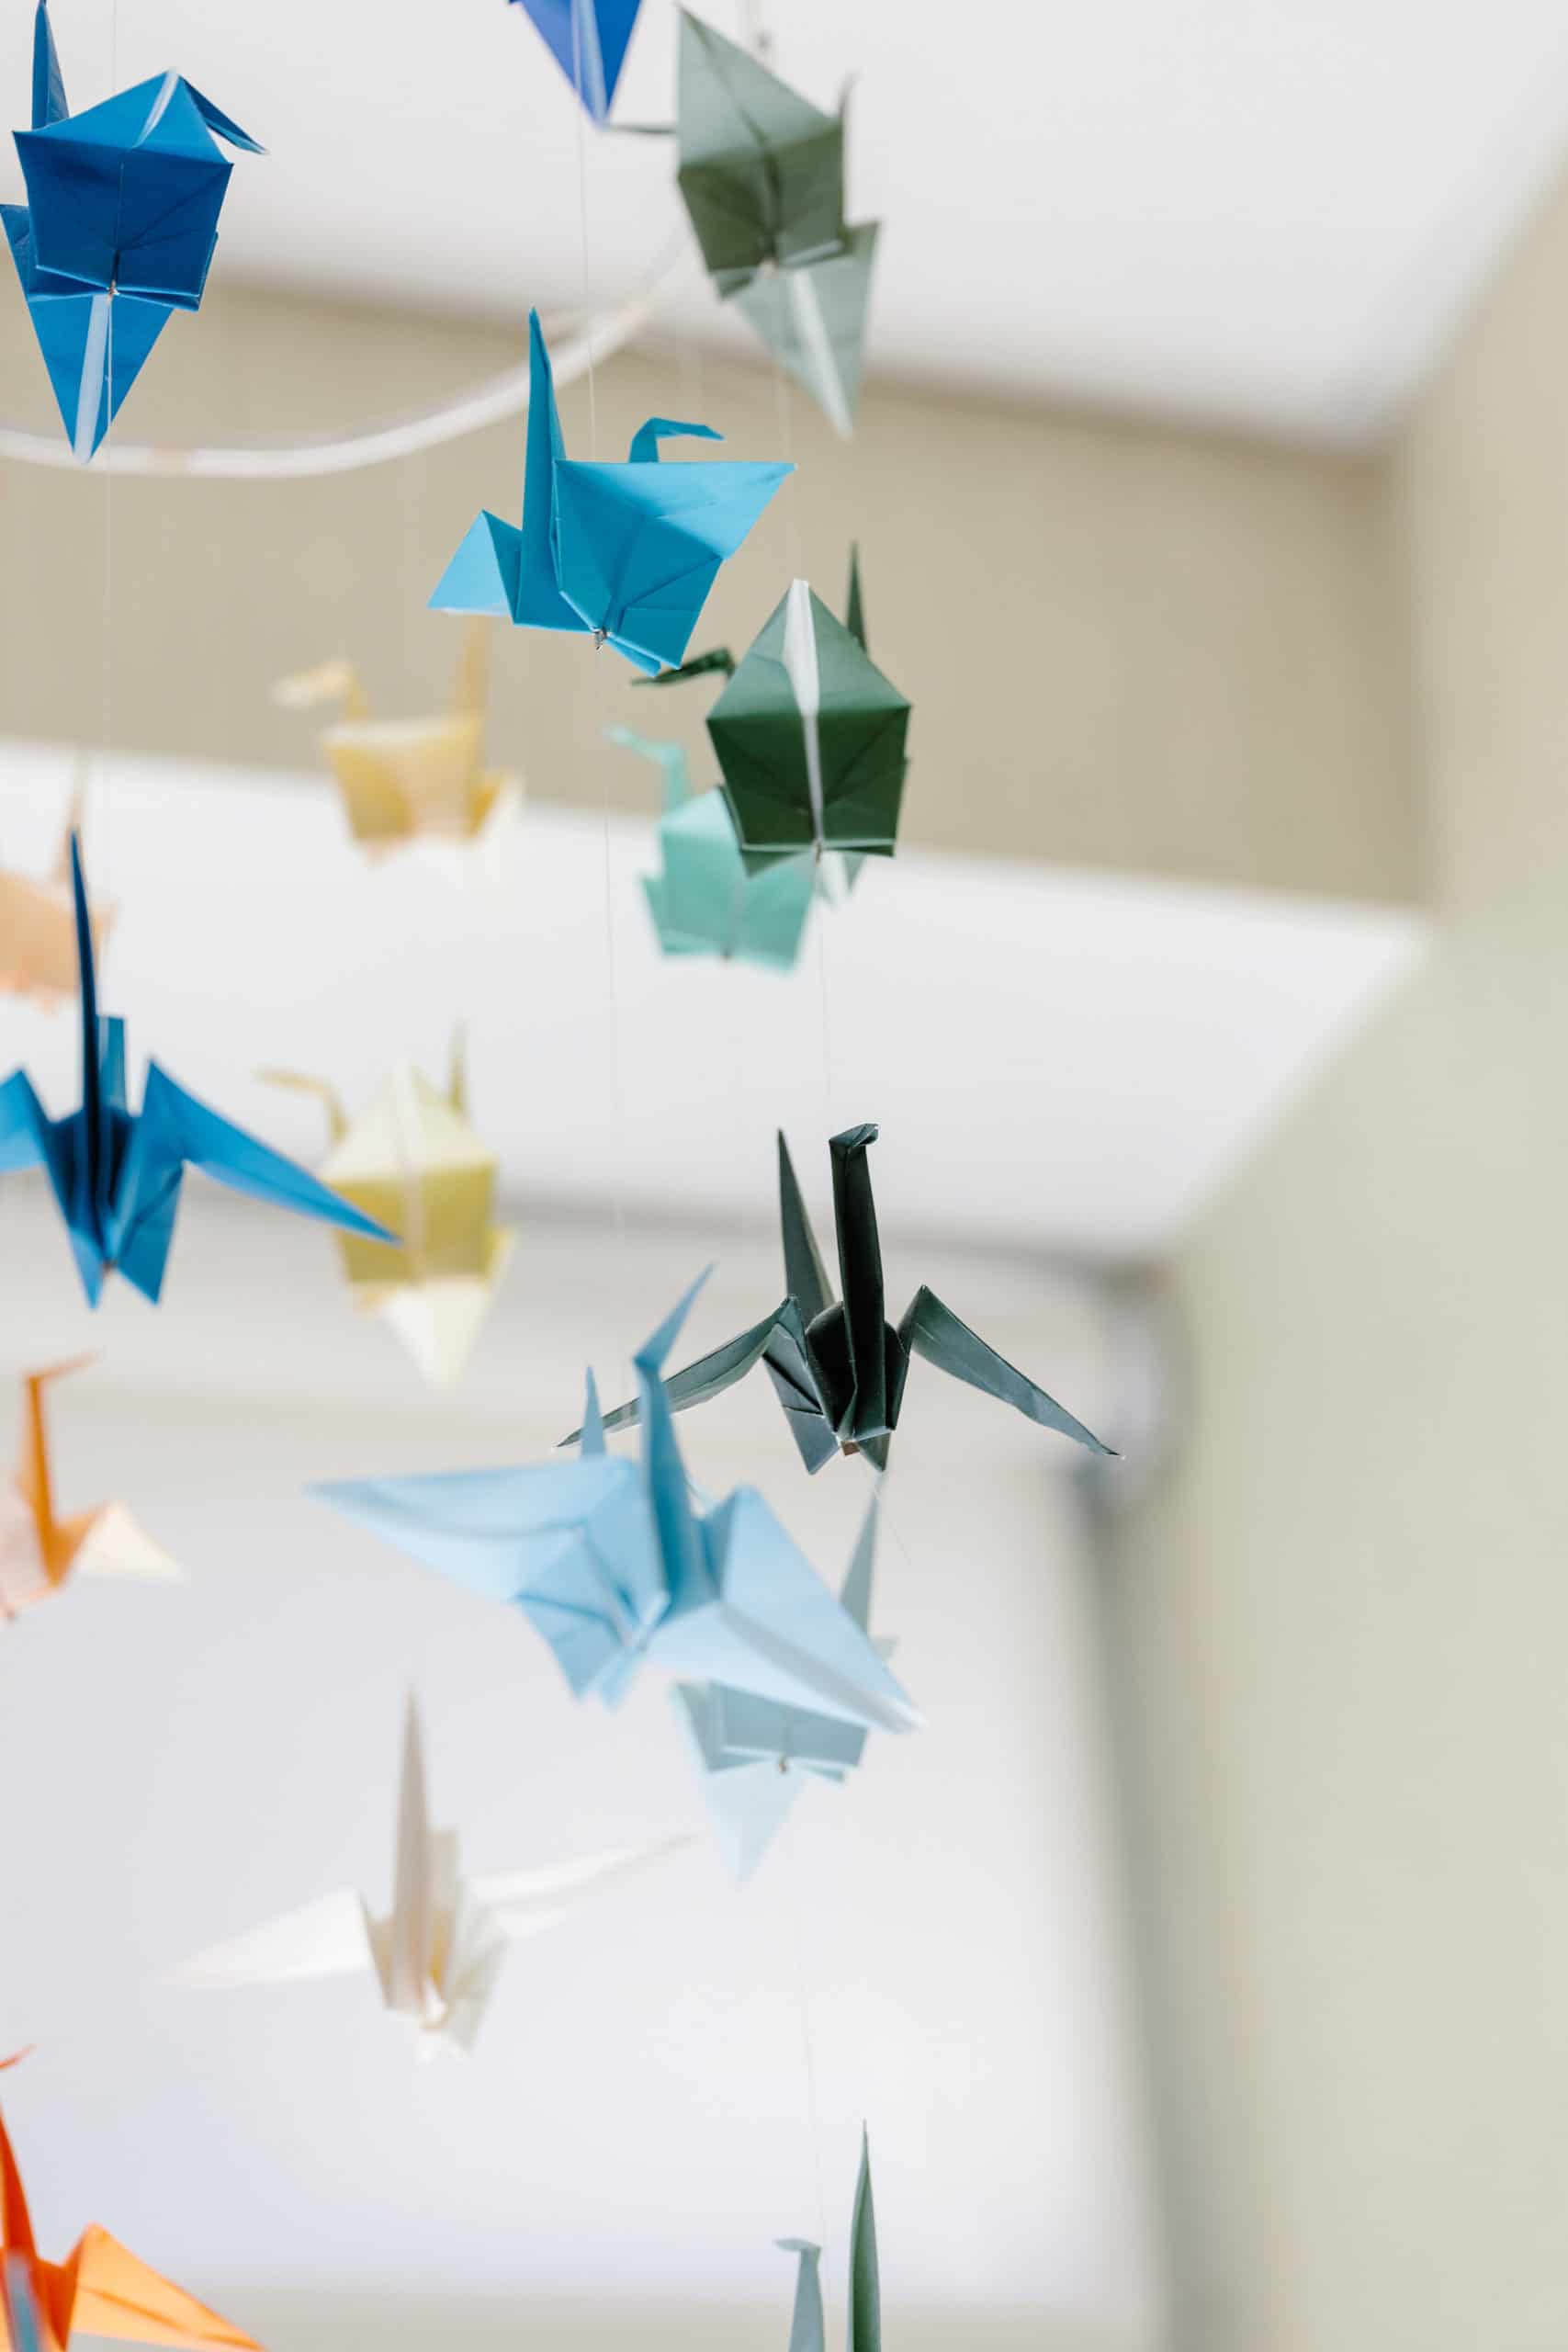 A mobile with paper cranes attached to it.